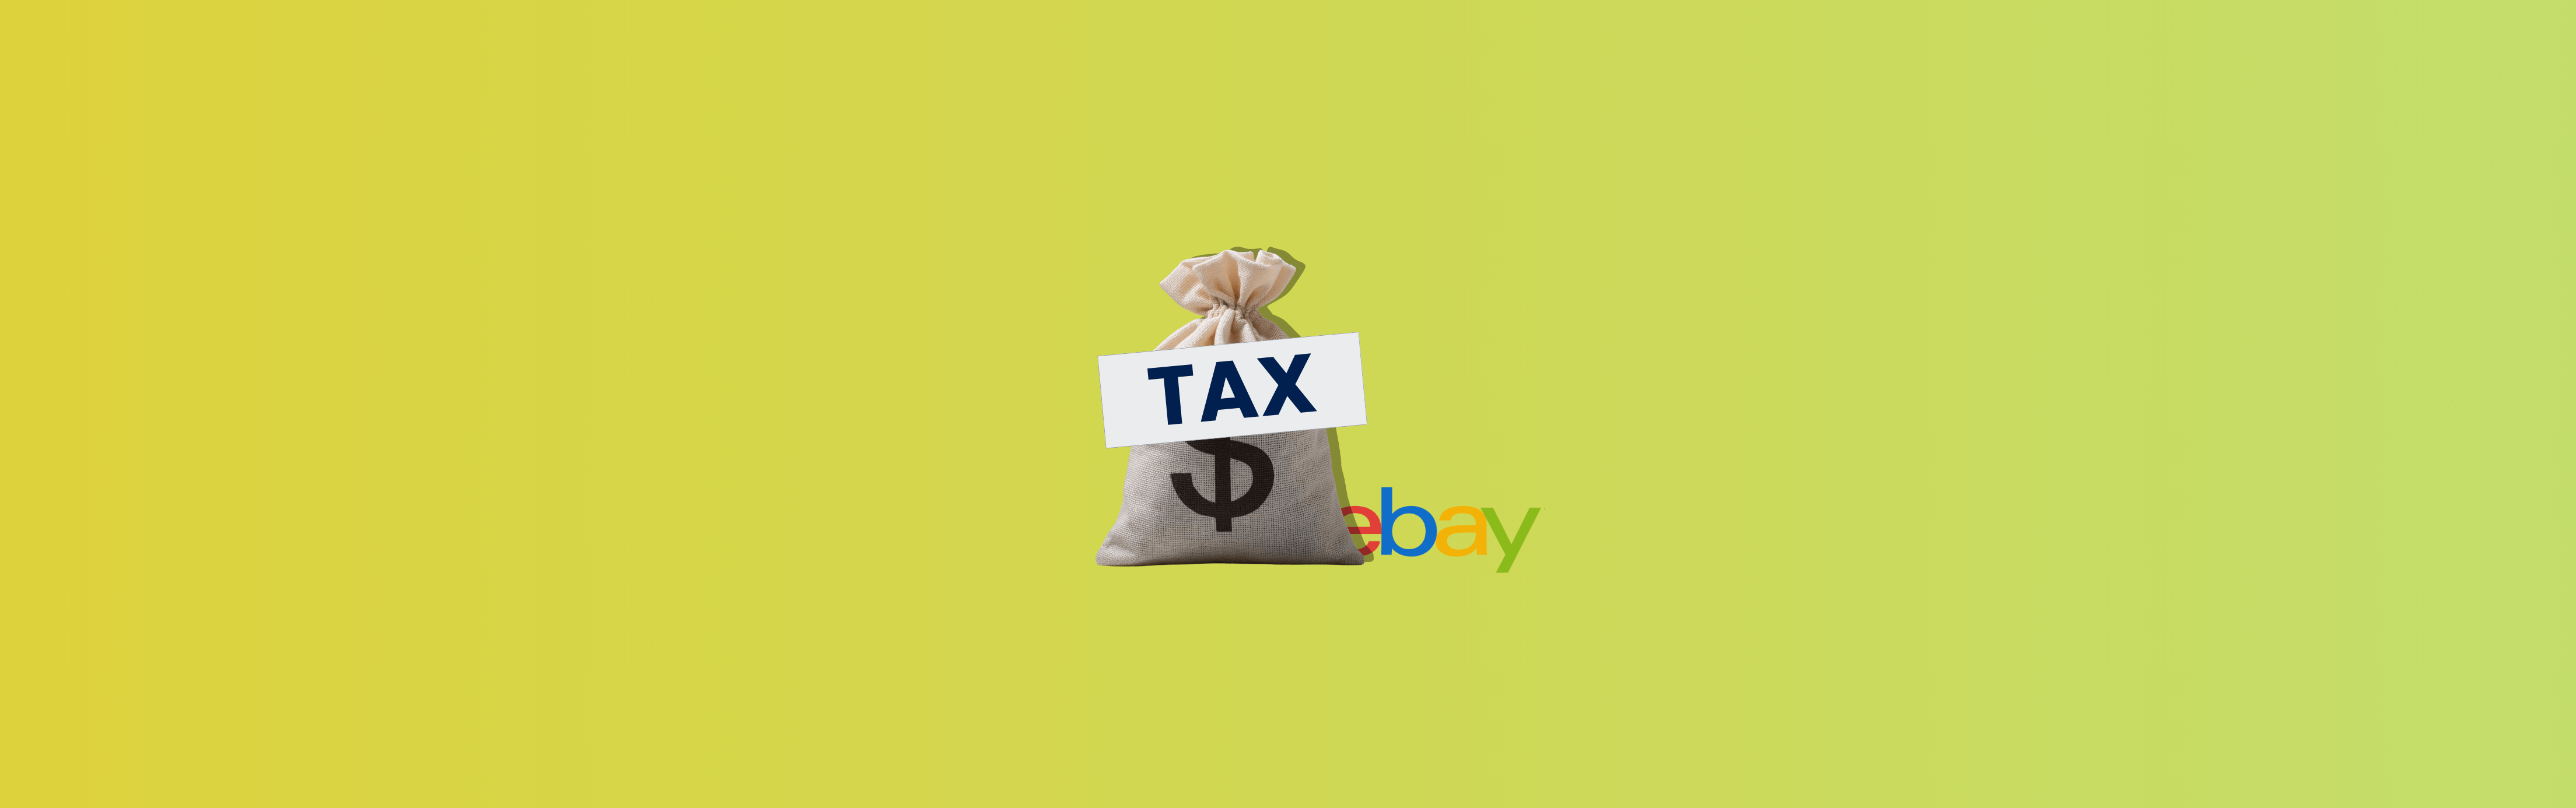 eBay Income Tax: When Are You Liable to Pay the Tax?